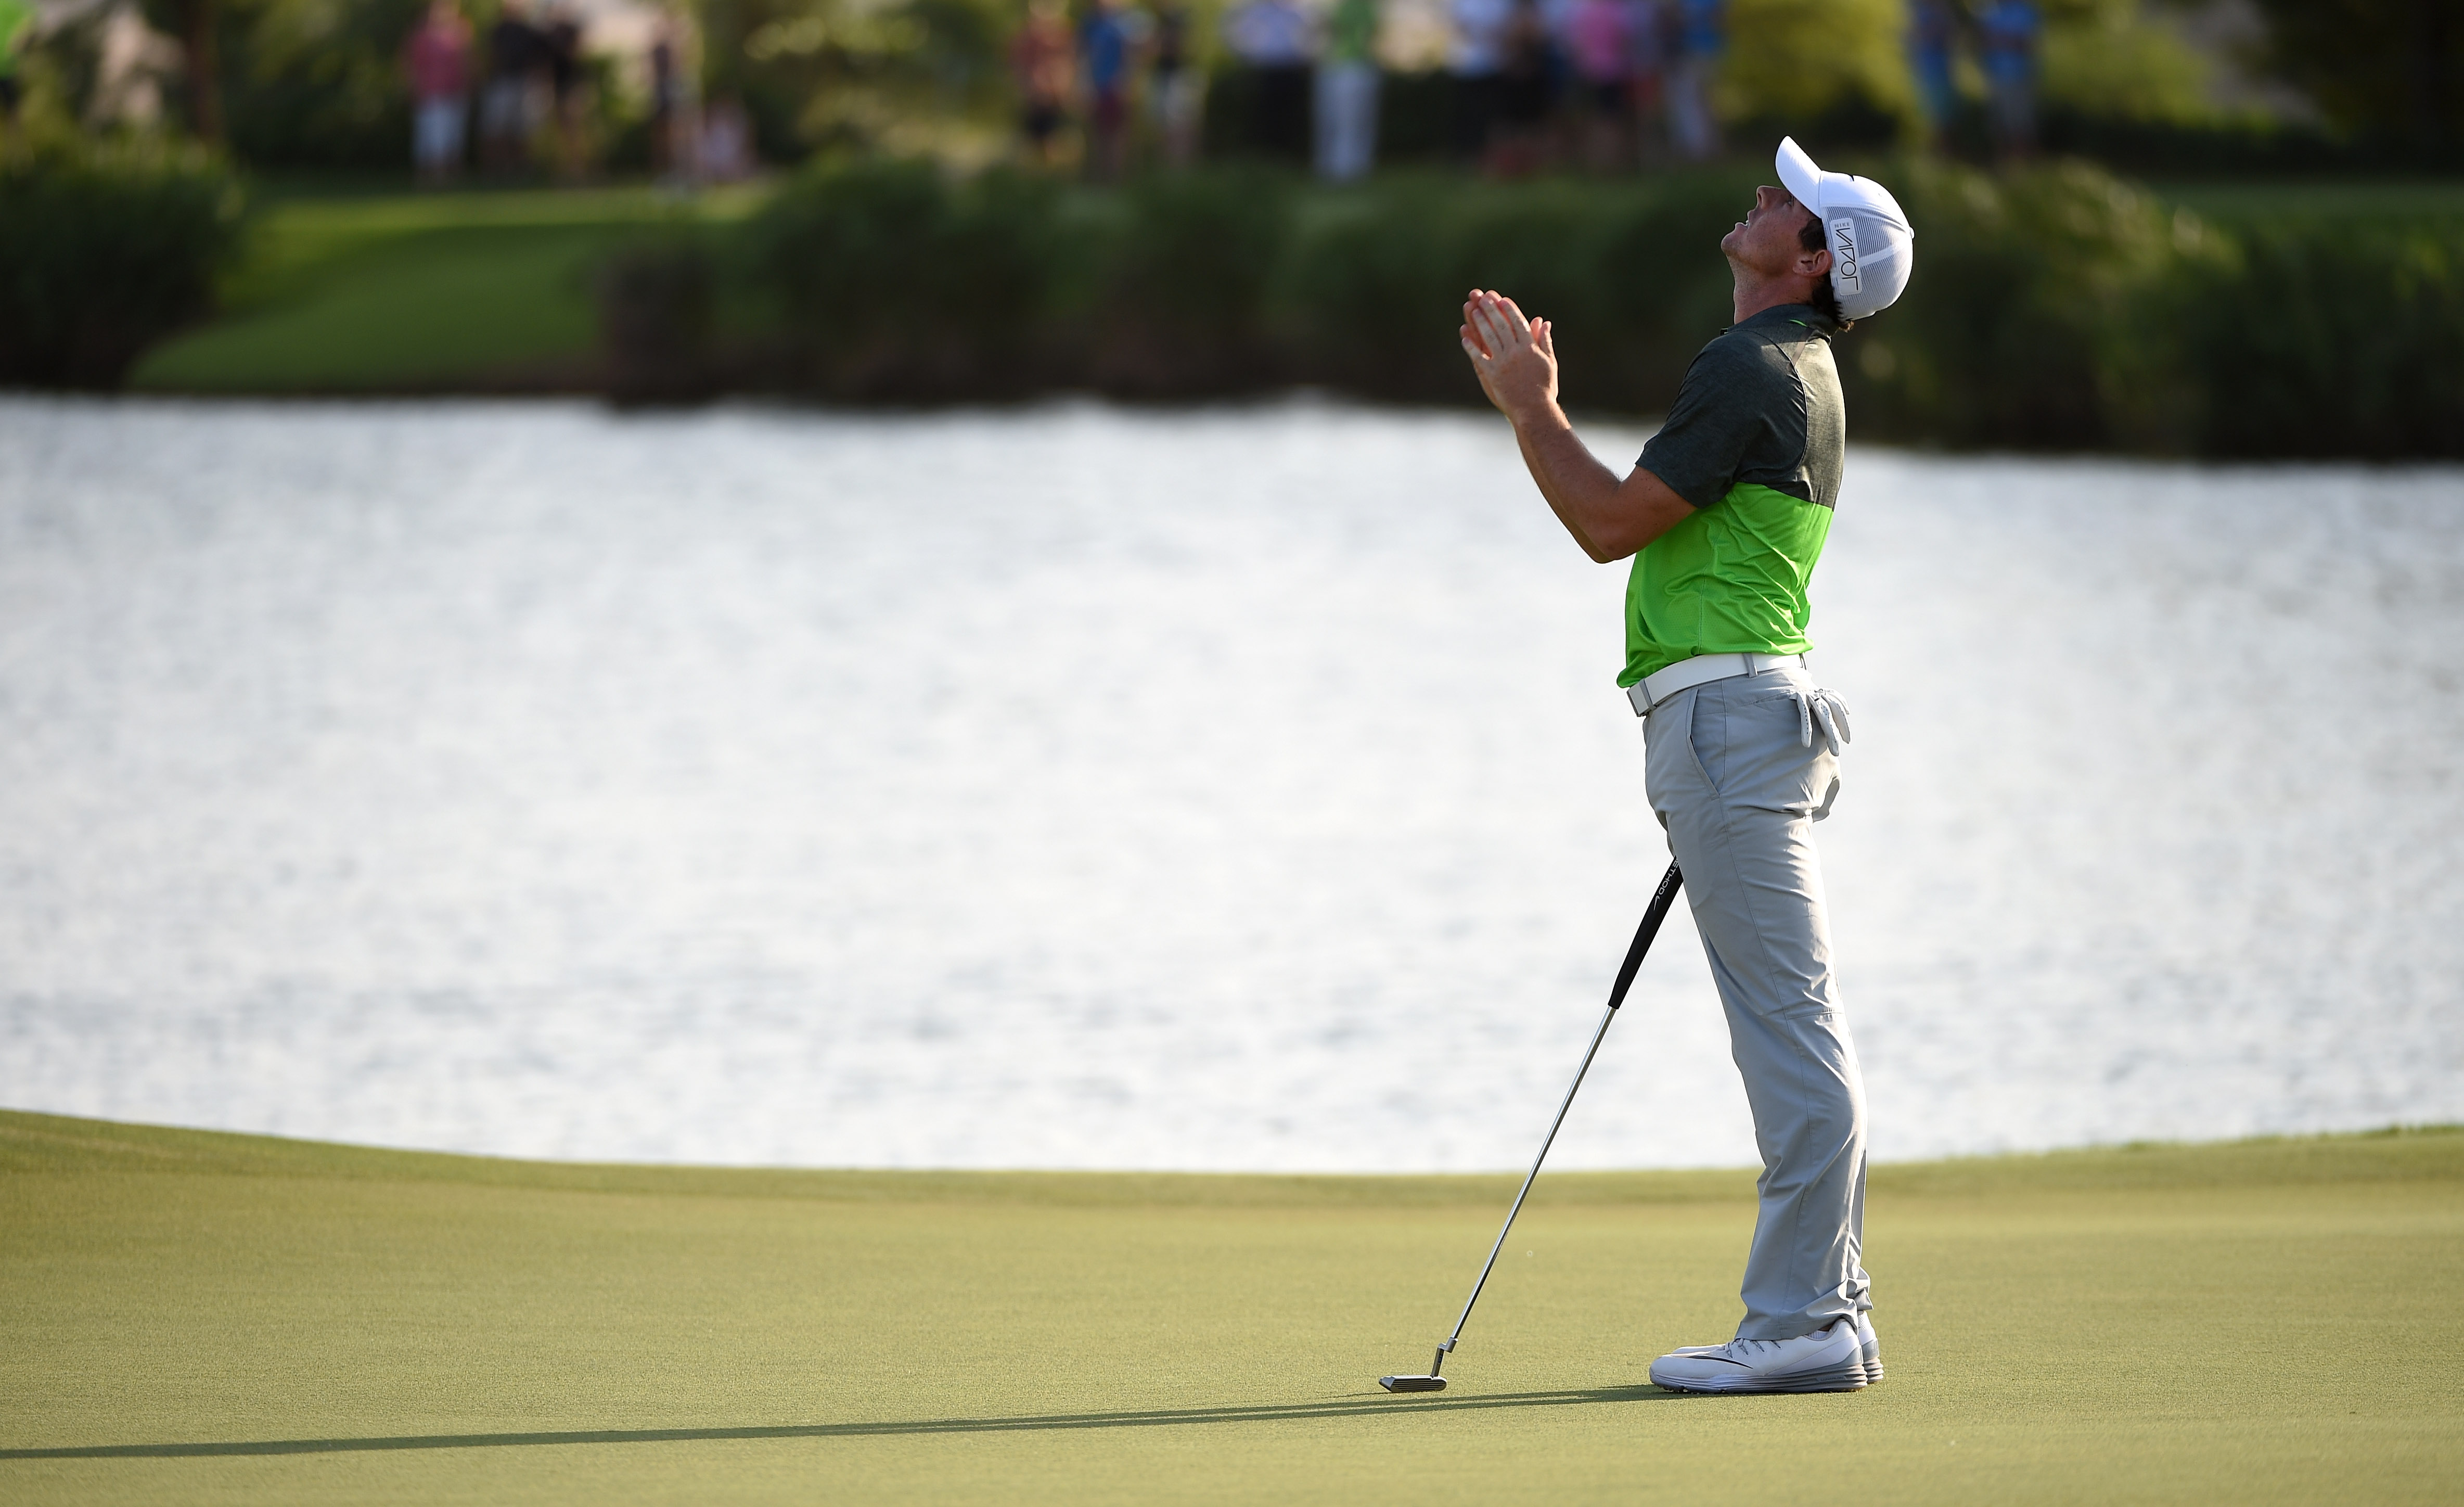 The world number one is also using a Nike Prototype putter (Photo: Getty Images)